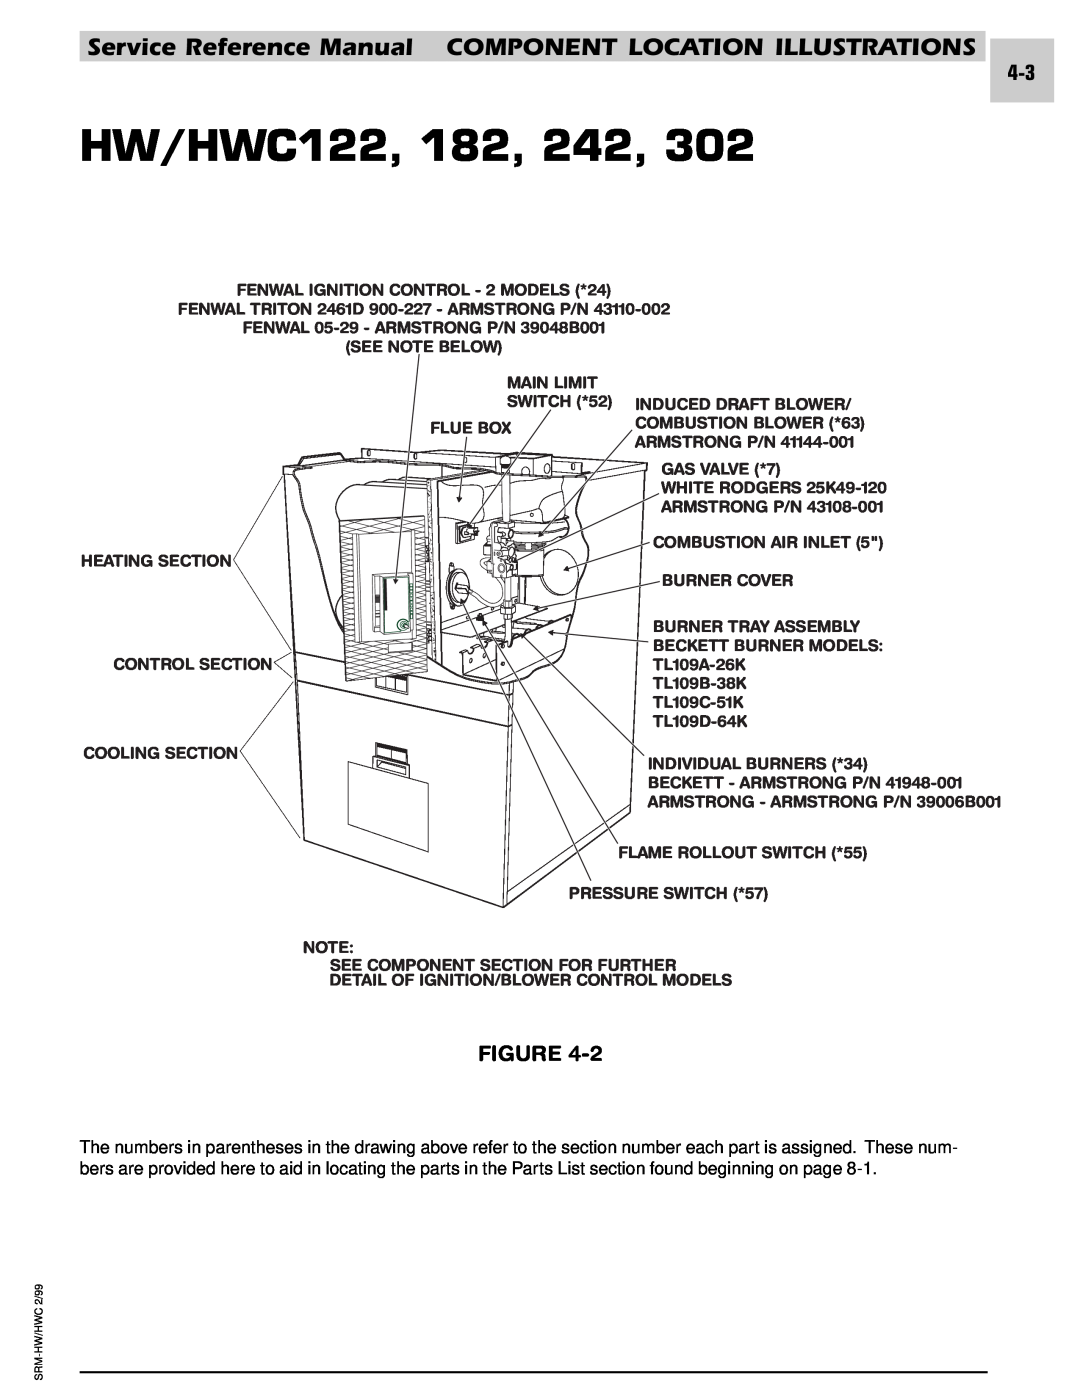 Armstrong World Industries 242, 243, 302, 123, 203 HW/HWC122, 182, Service Reference Manual COMPONENT LOCATION ILLUSTRATIONS 